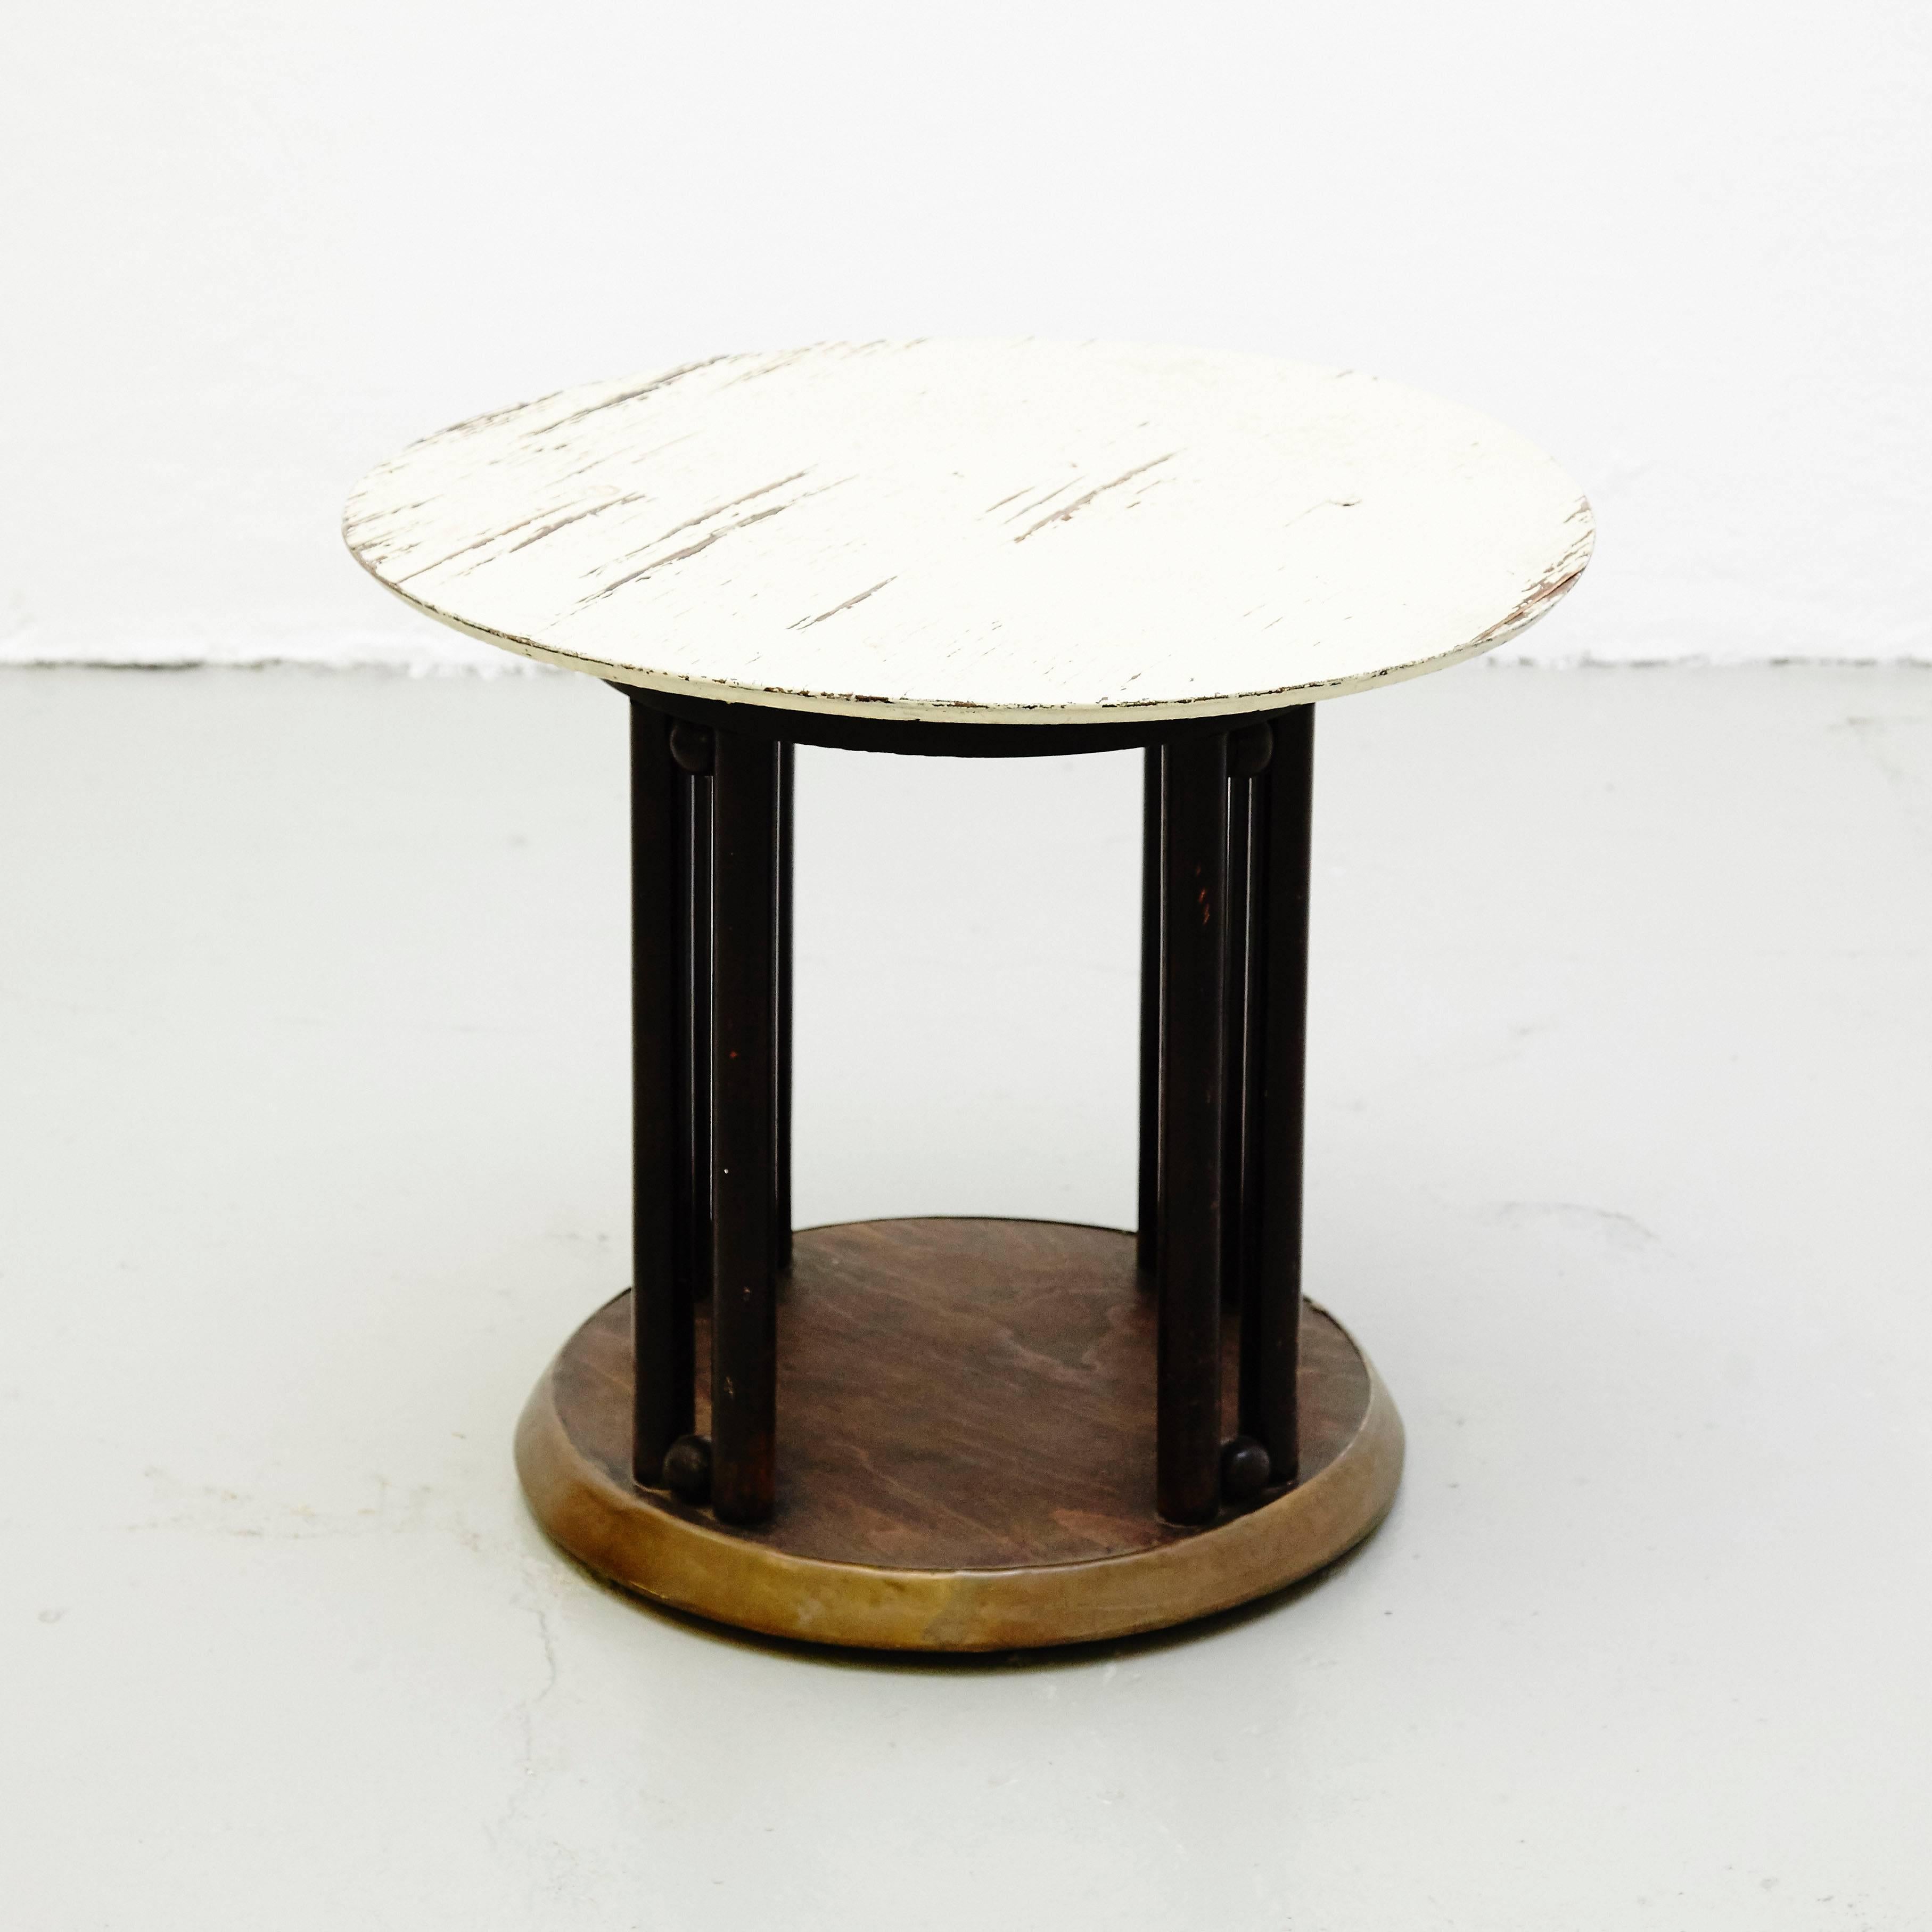  Side table designed by Josef Hoffmann, circa 1905 for Cabaret Fledermaus in Viena.
Manufactured by Kohn (Austria), circa 1920.
Lacquered wood.

With manufacturers label to the underside.

In great original condition, preserving a beautiful